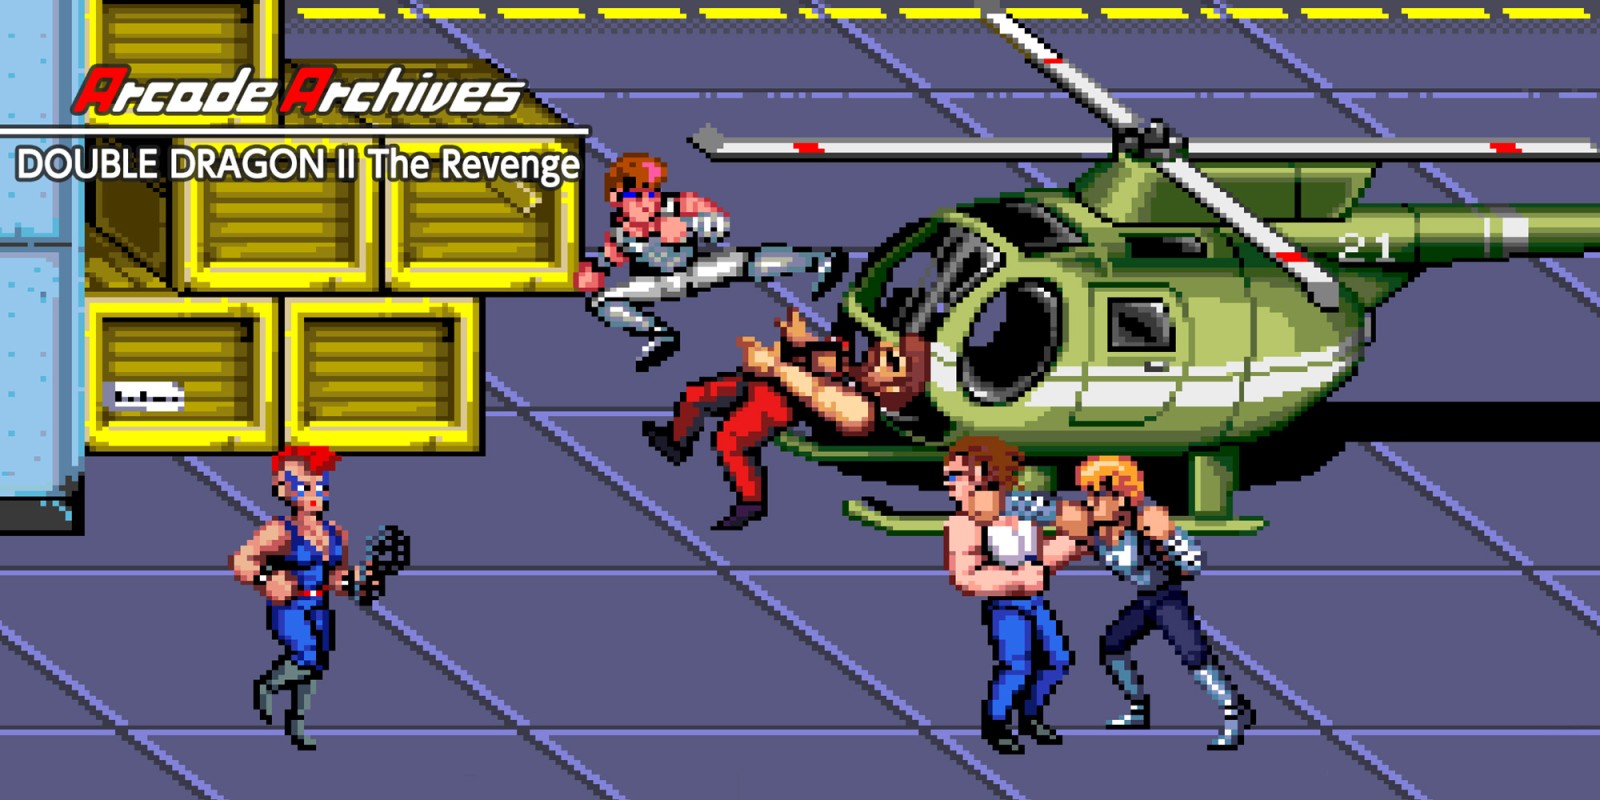 Arcade Archives DOUBLE DRAGON II The Revenge | Nintendo Switch download  software | Games | Nintendo